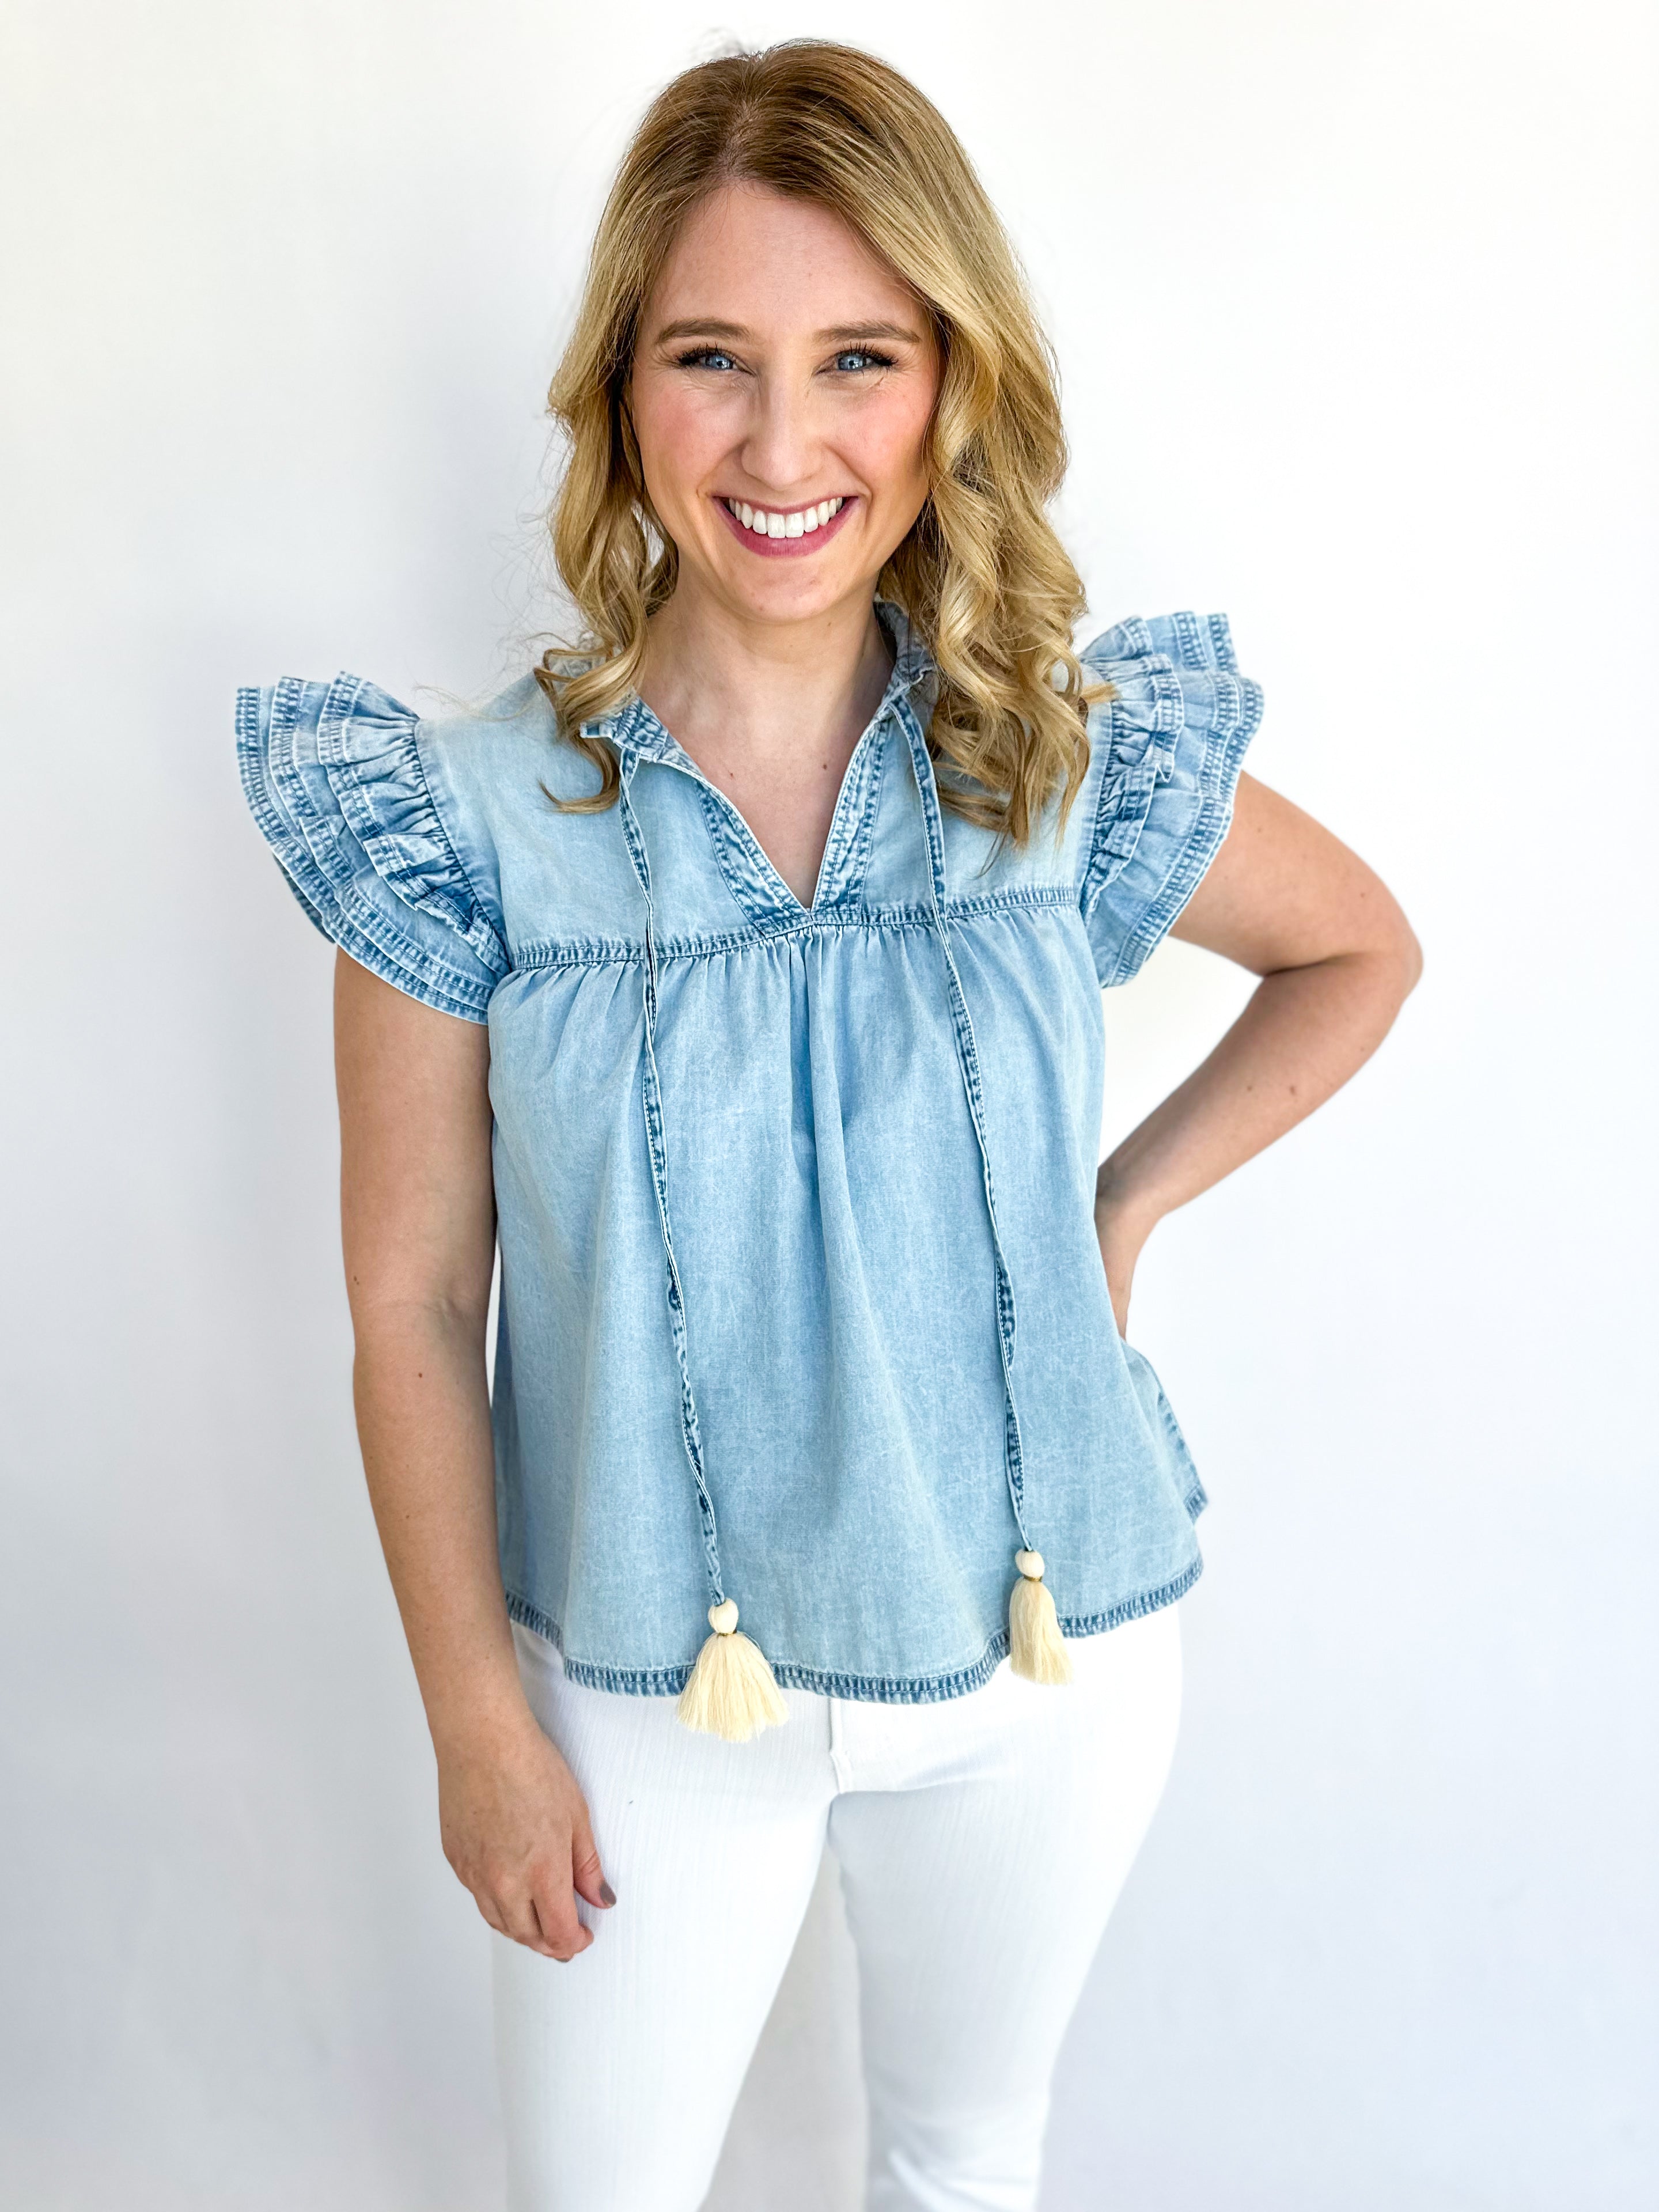 Denim Ruffle Blouse - THML-200 Fashion Blouses-THML-July & June Women's Fashion Boutique Located in San Antonio, Texas